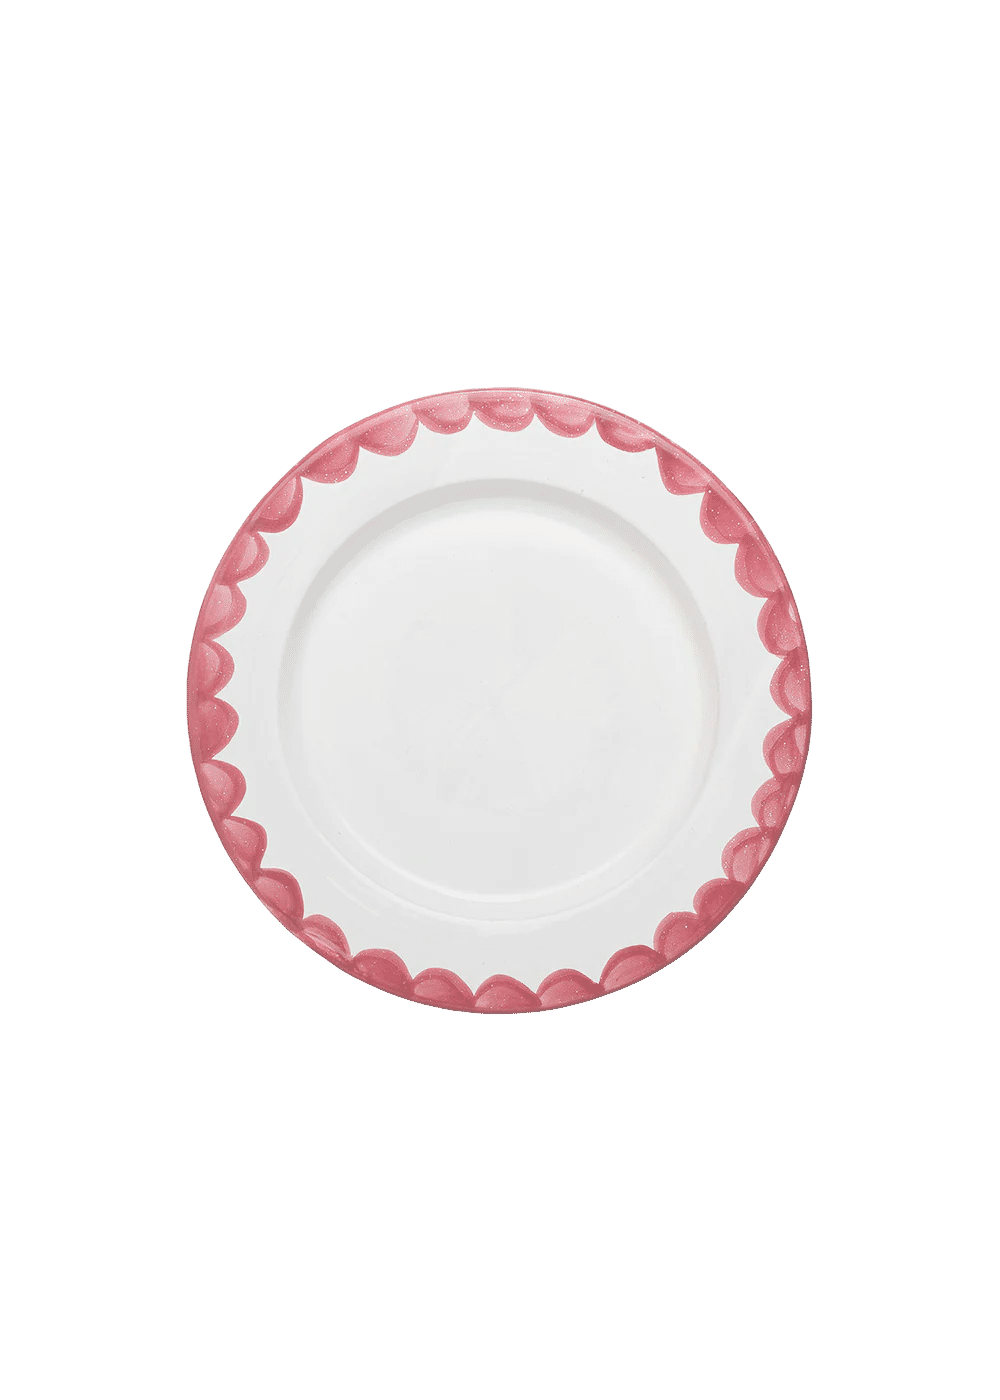 Pink Scallop Dinner Plate, Set of 2